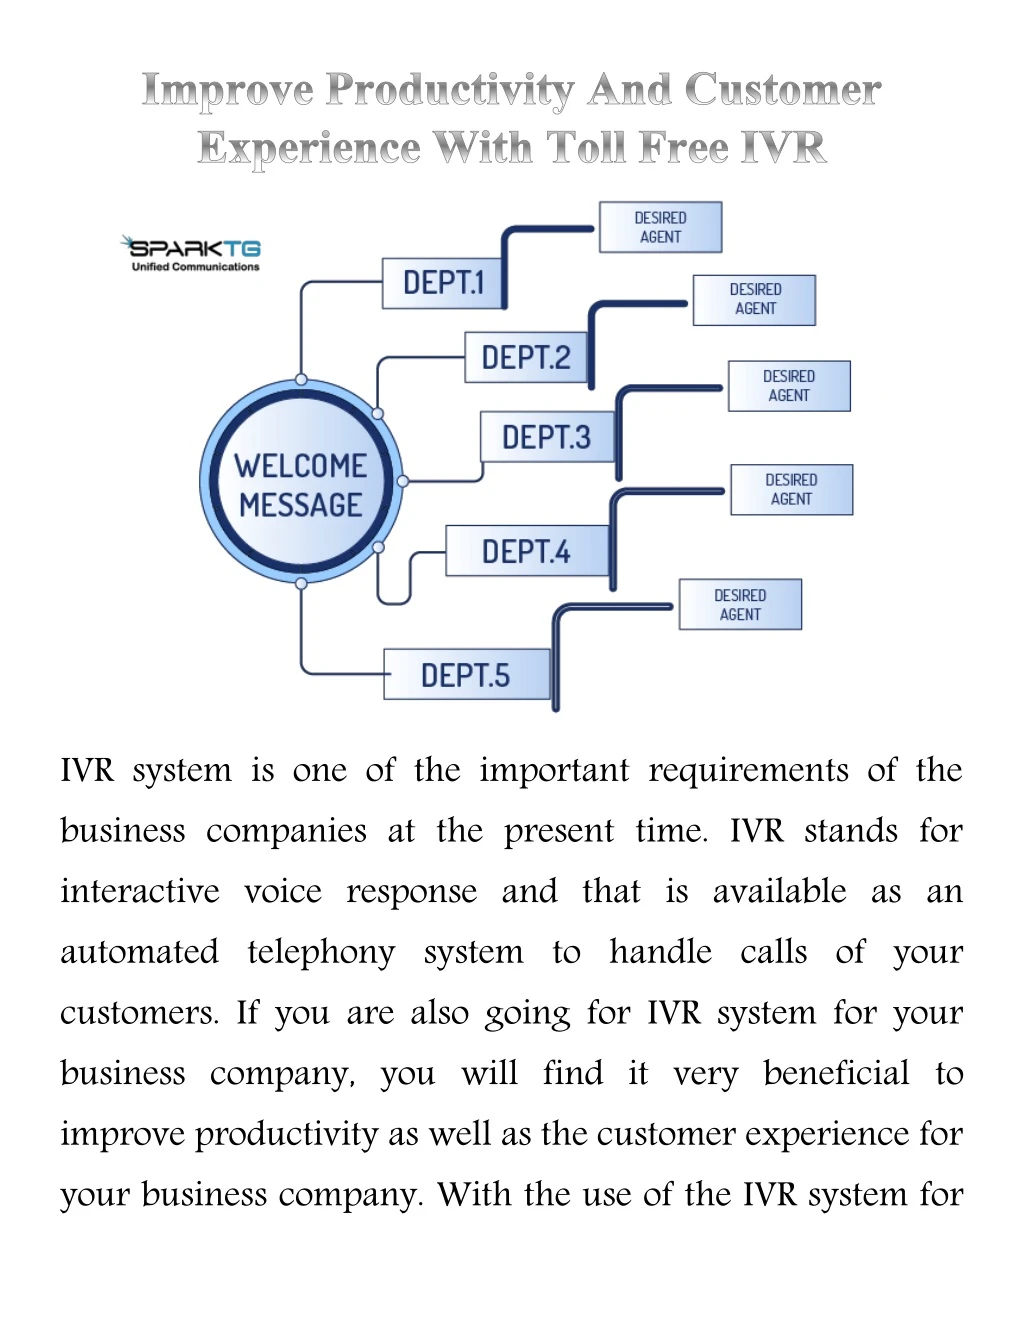 ivr system is one of the important requirements